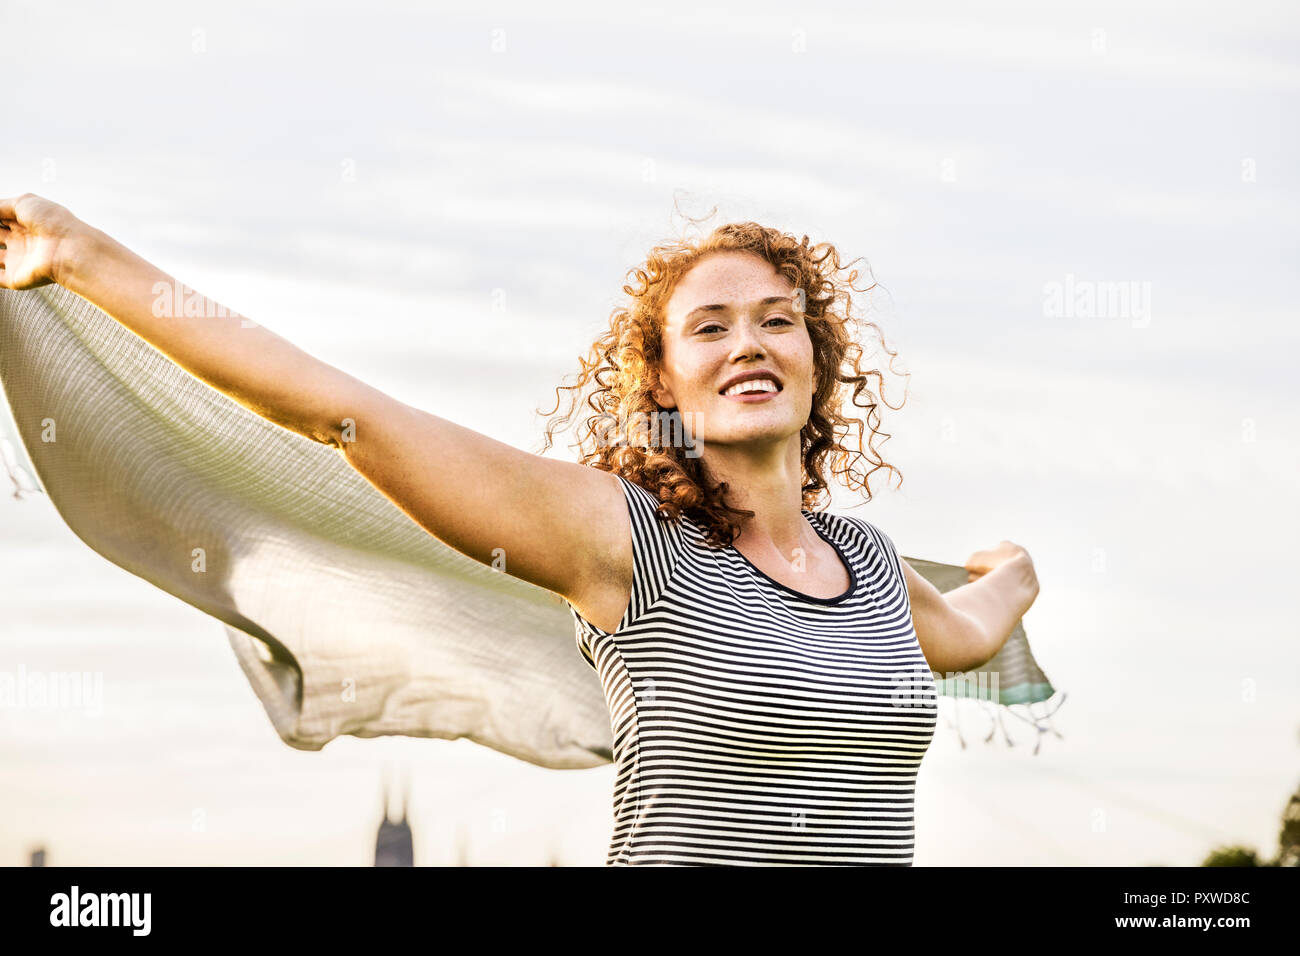 Germany, Cologne, portrait of happy young woman Stock Photo